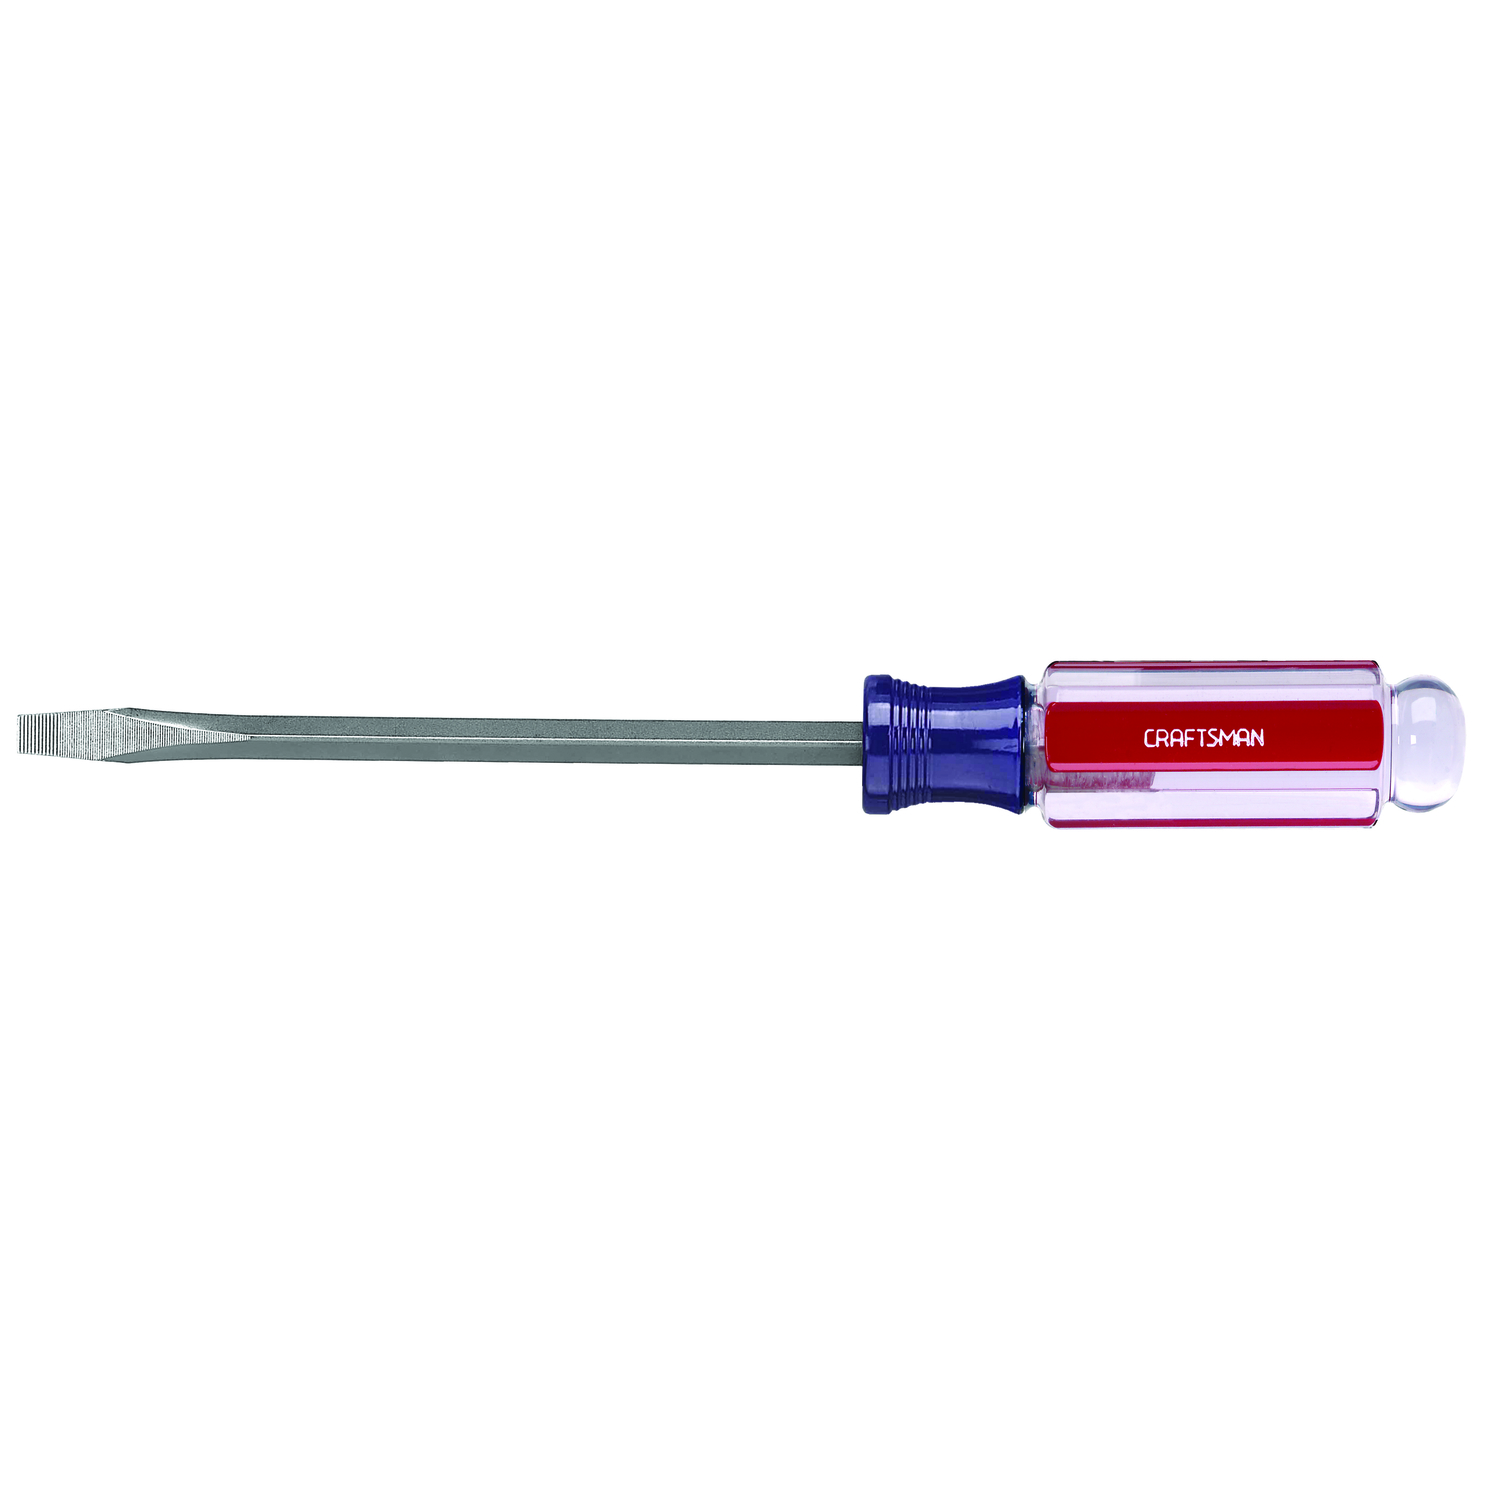 UPC 648738415842 product image for Craftsman 1/4in Slotted Screwdriver (00941584) | upcitemdb.com